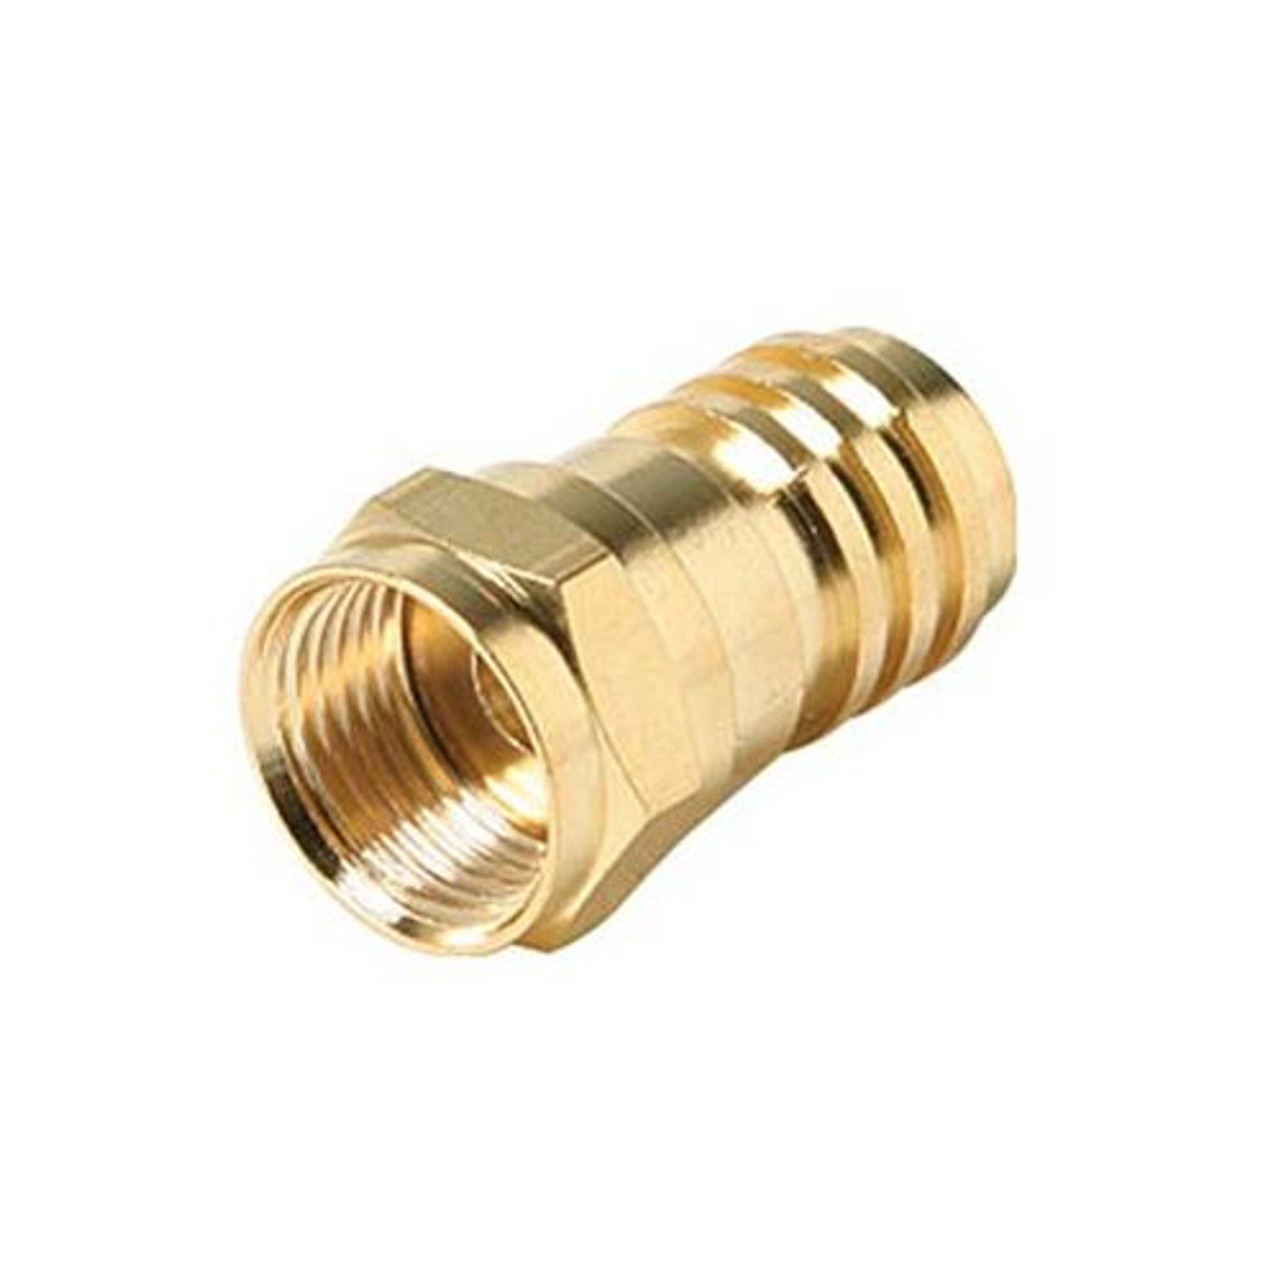 Steren 200-031-10 RG-59 Gold Crimp-On F Connector 10 Pack Crimp-On RG59 Coaxial Cable Plug Connector Coax Cable TV Antenna Video Data Plug Connectors, Part # 200031-10